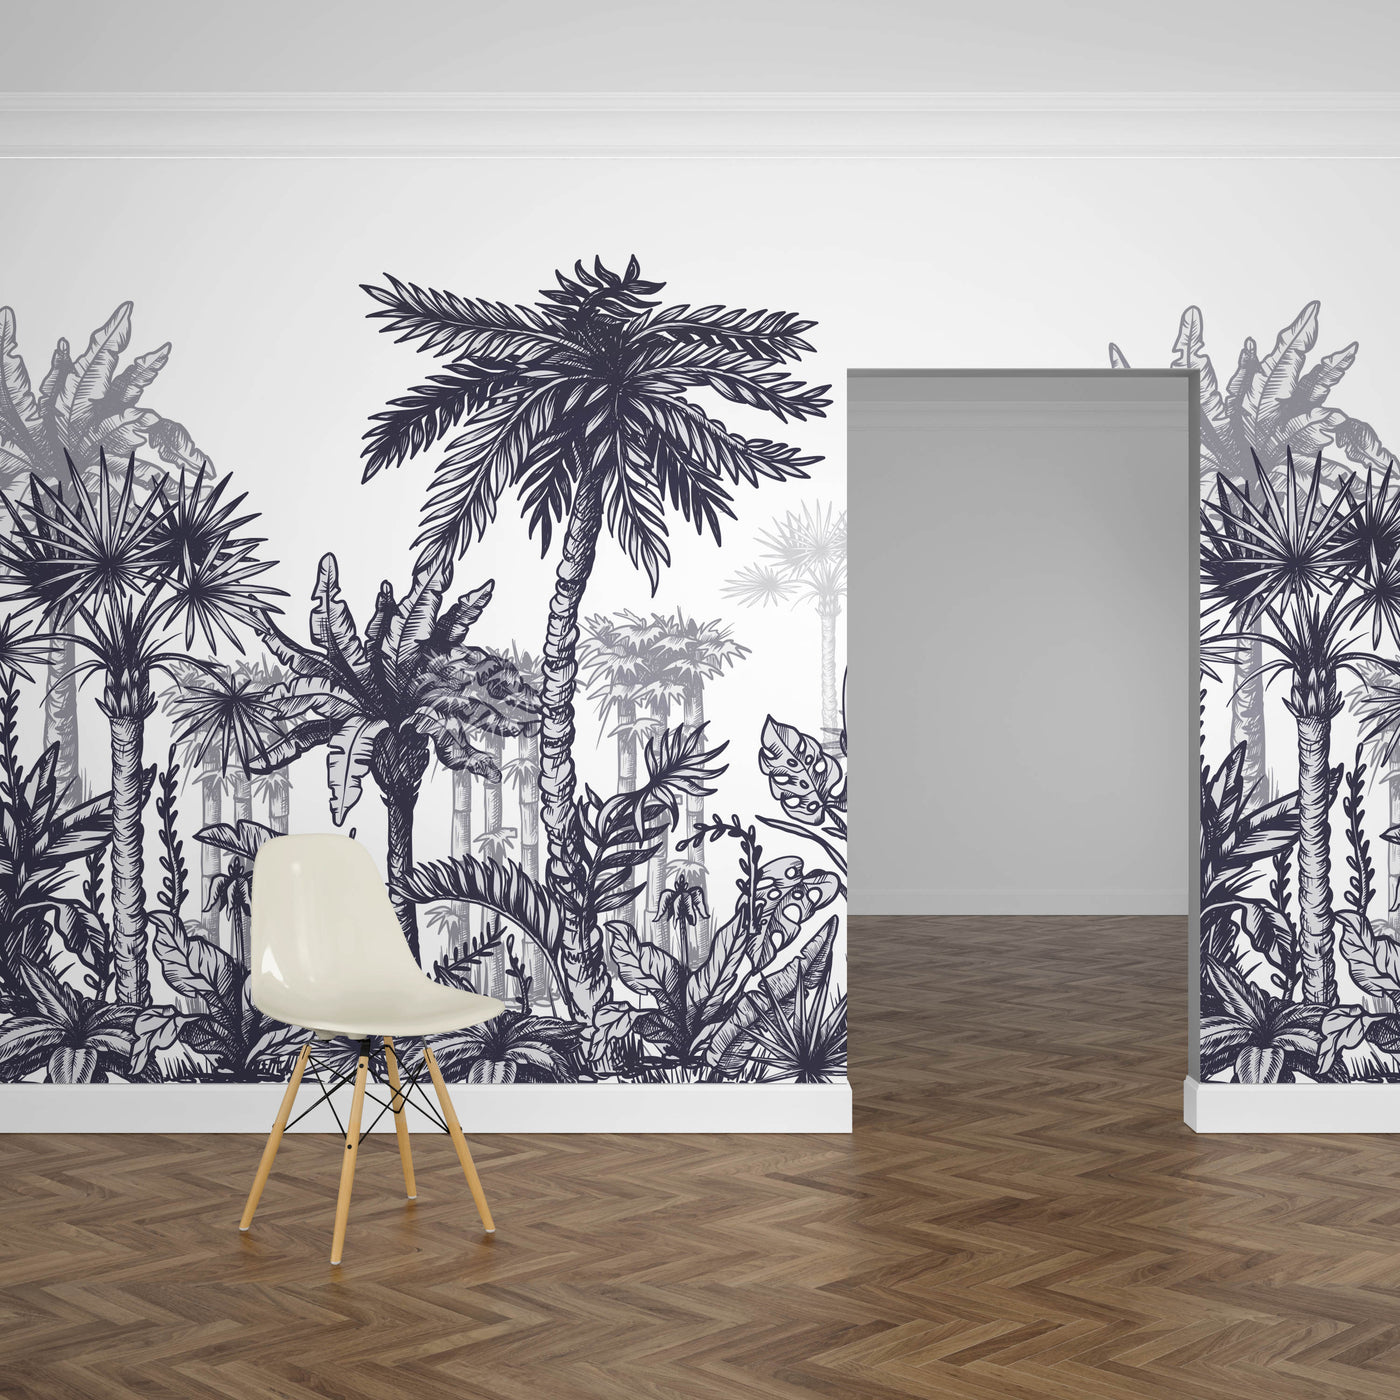 Black and White Palm Tree Mural Wallpaper (m²)-Wall Decor-BLACK & WHITE WALLPAPER, LEAF WALLPAPER, MURALS, MURALS / WALLPAPERS, NON-WOVEN WALLPAPER, PALM WALLPAPER, TROPICAL MURAL, TROPICAL WALLPAPERS-Forest Homes-Nature inspired decor-Nature decor